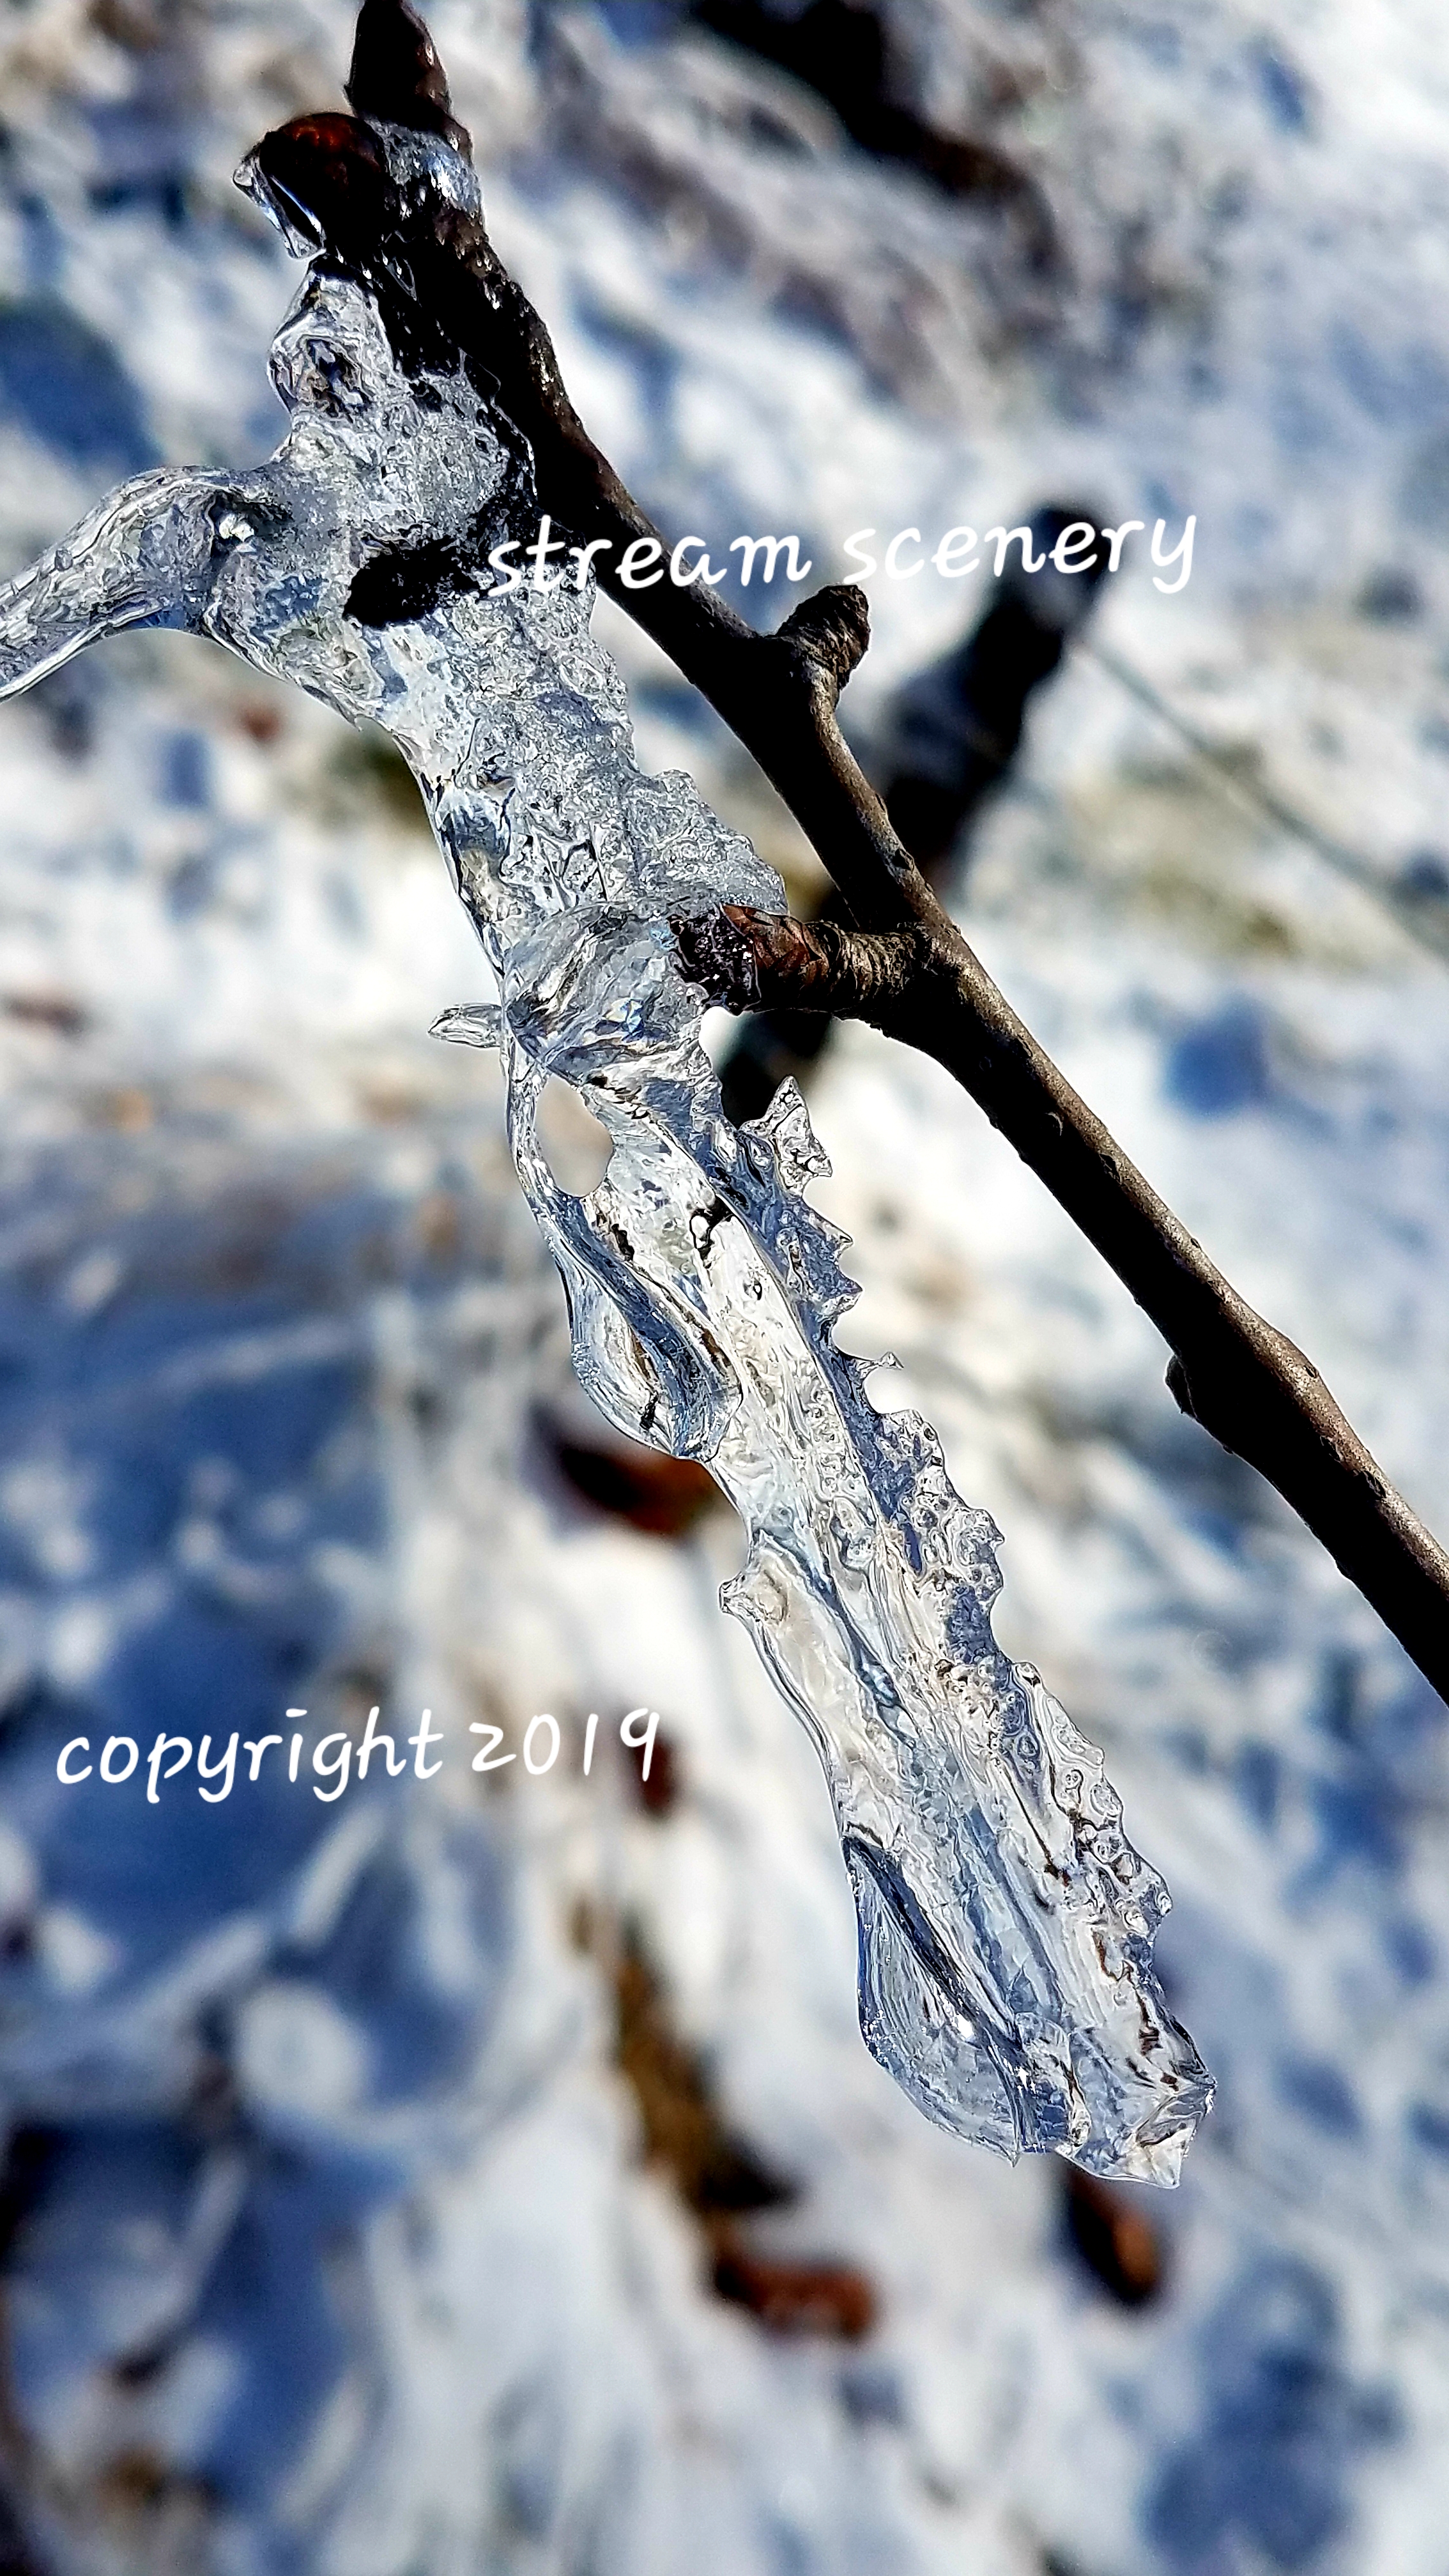 #WICE BRANCH ICICLE IN WINTER BY STREAM SCENERY WINTER AND NATURE PHOTOGRAPHY AND PRINTS.